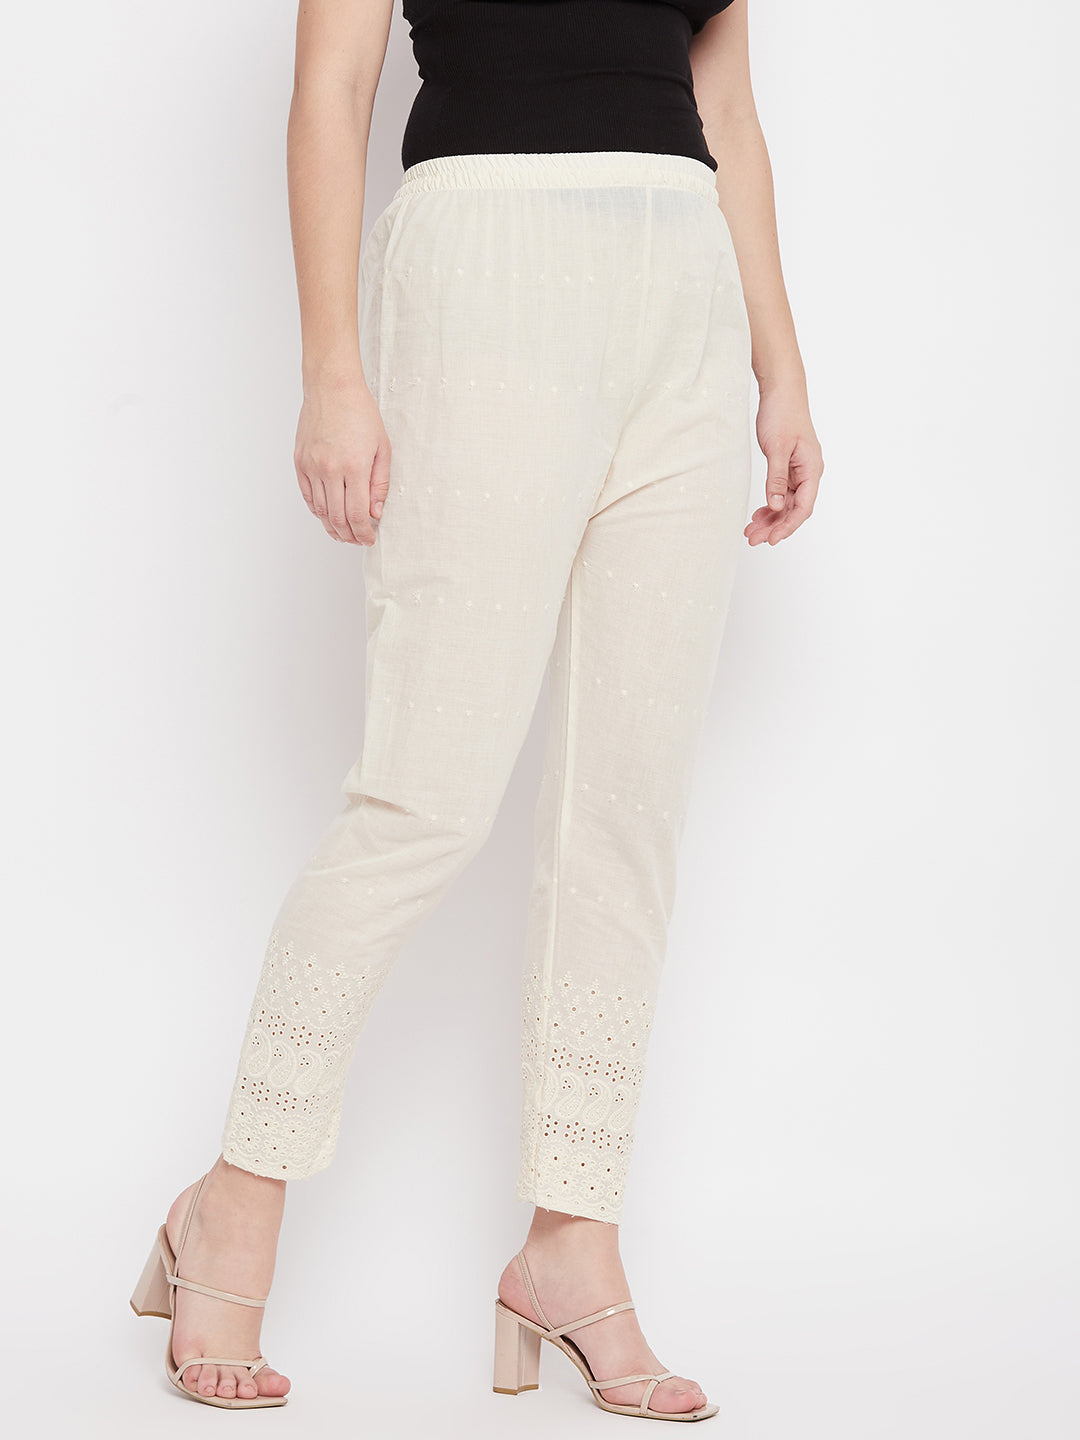 Buy UB WOLF Women's Regular Fit Lucknowi Chikankari Ankle Length Elastic  Waisted Rayon Pant/Palazzo/Trouser in Cream Color Pack of 1 (M) at Amazon.in